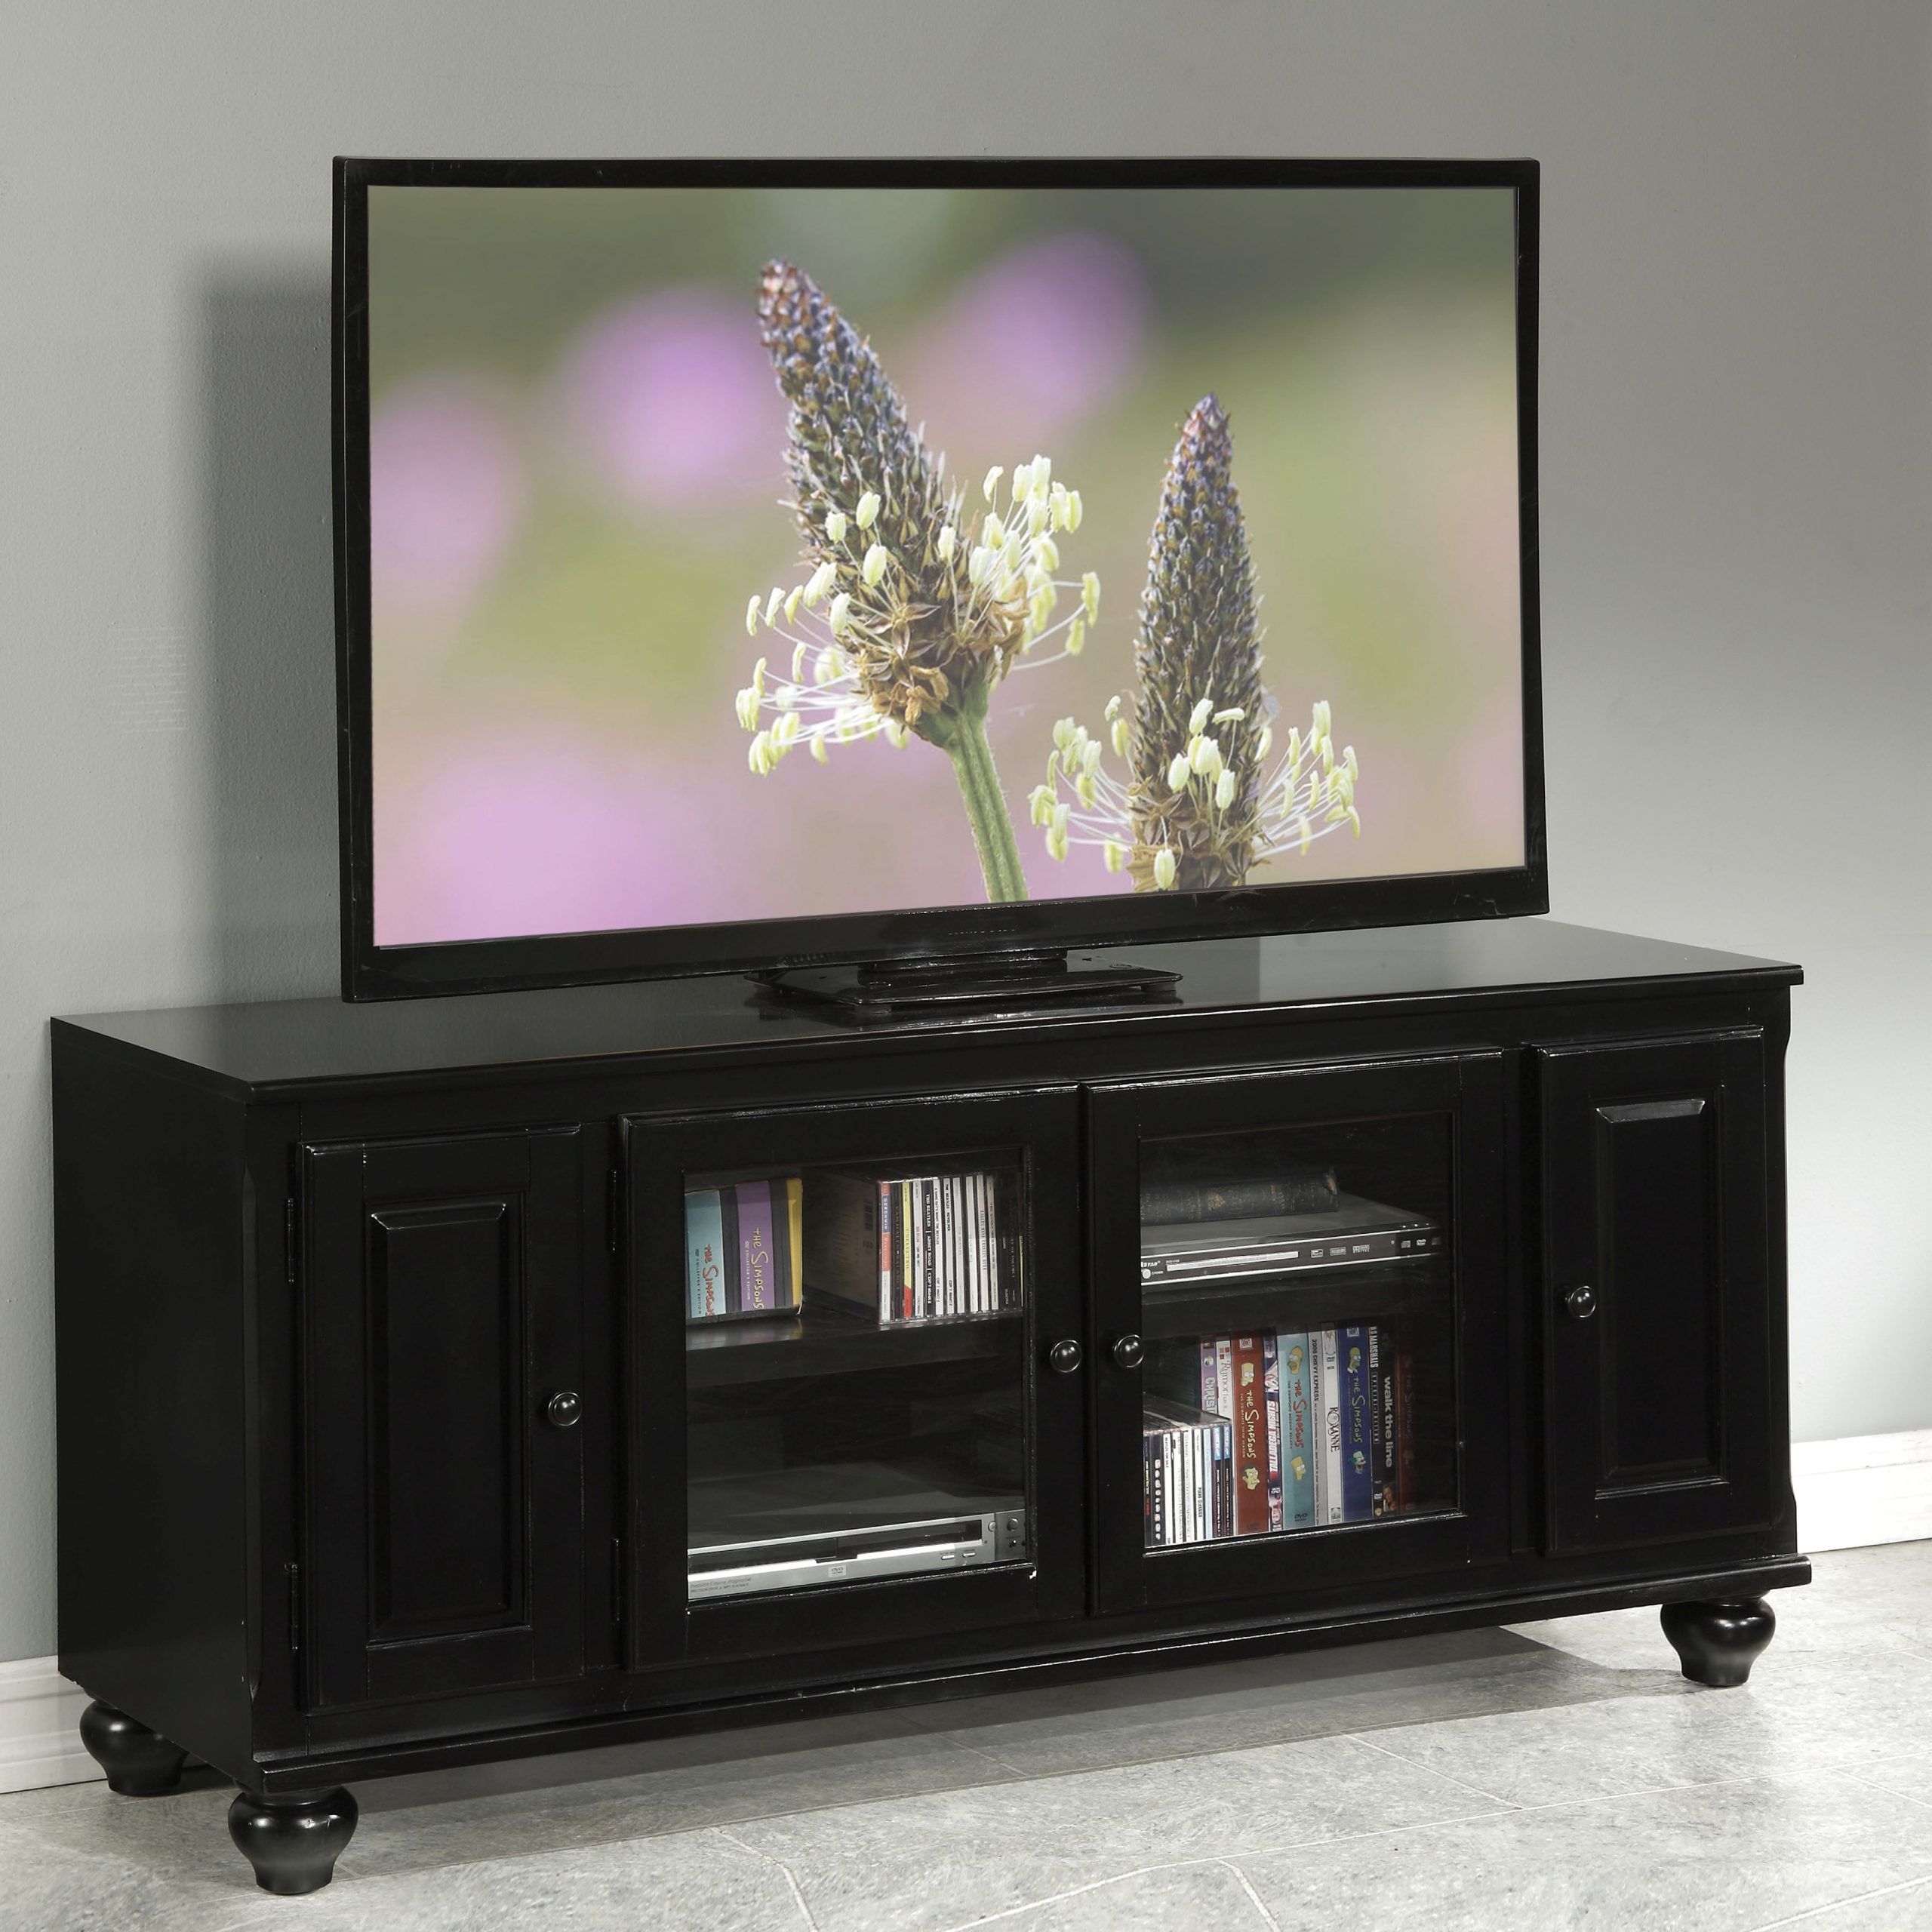 Acme Furniture Ferla Black Tv Stand | The Classy Home Inside Opod Tv Stand Black (View 2 of 15)